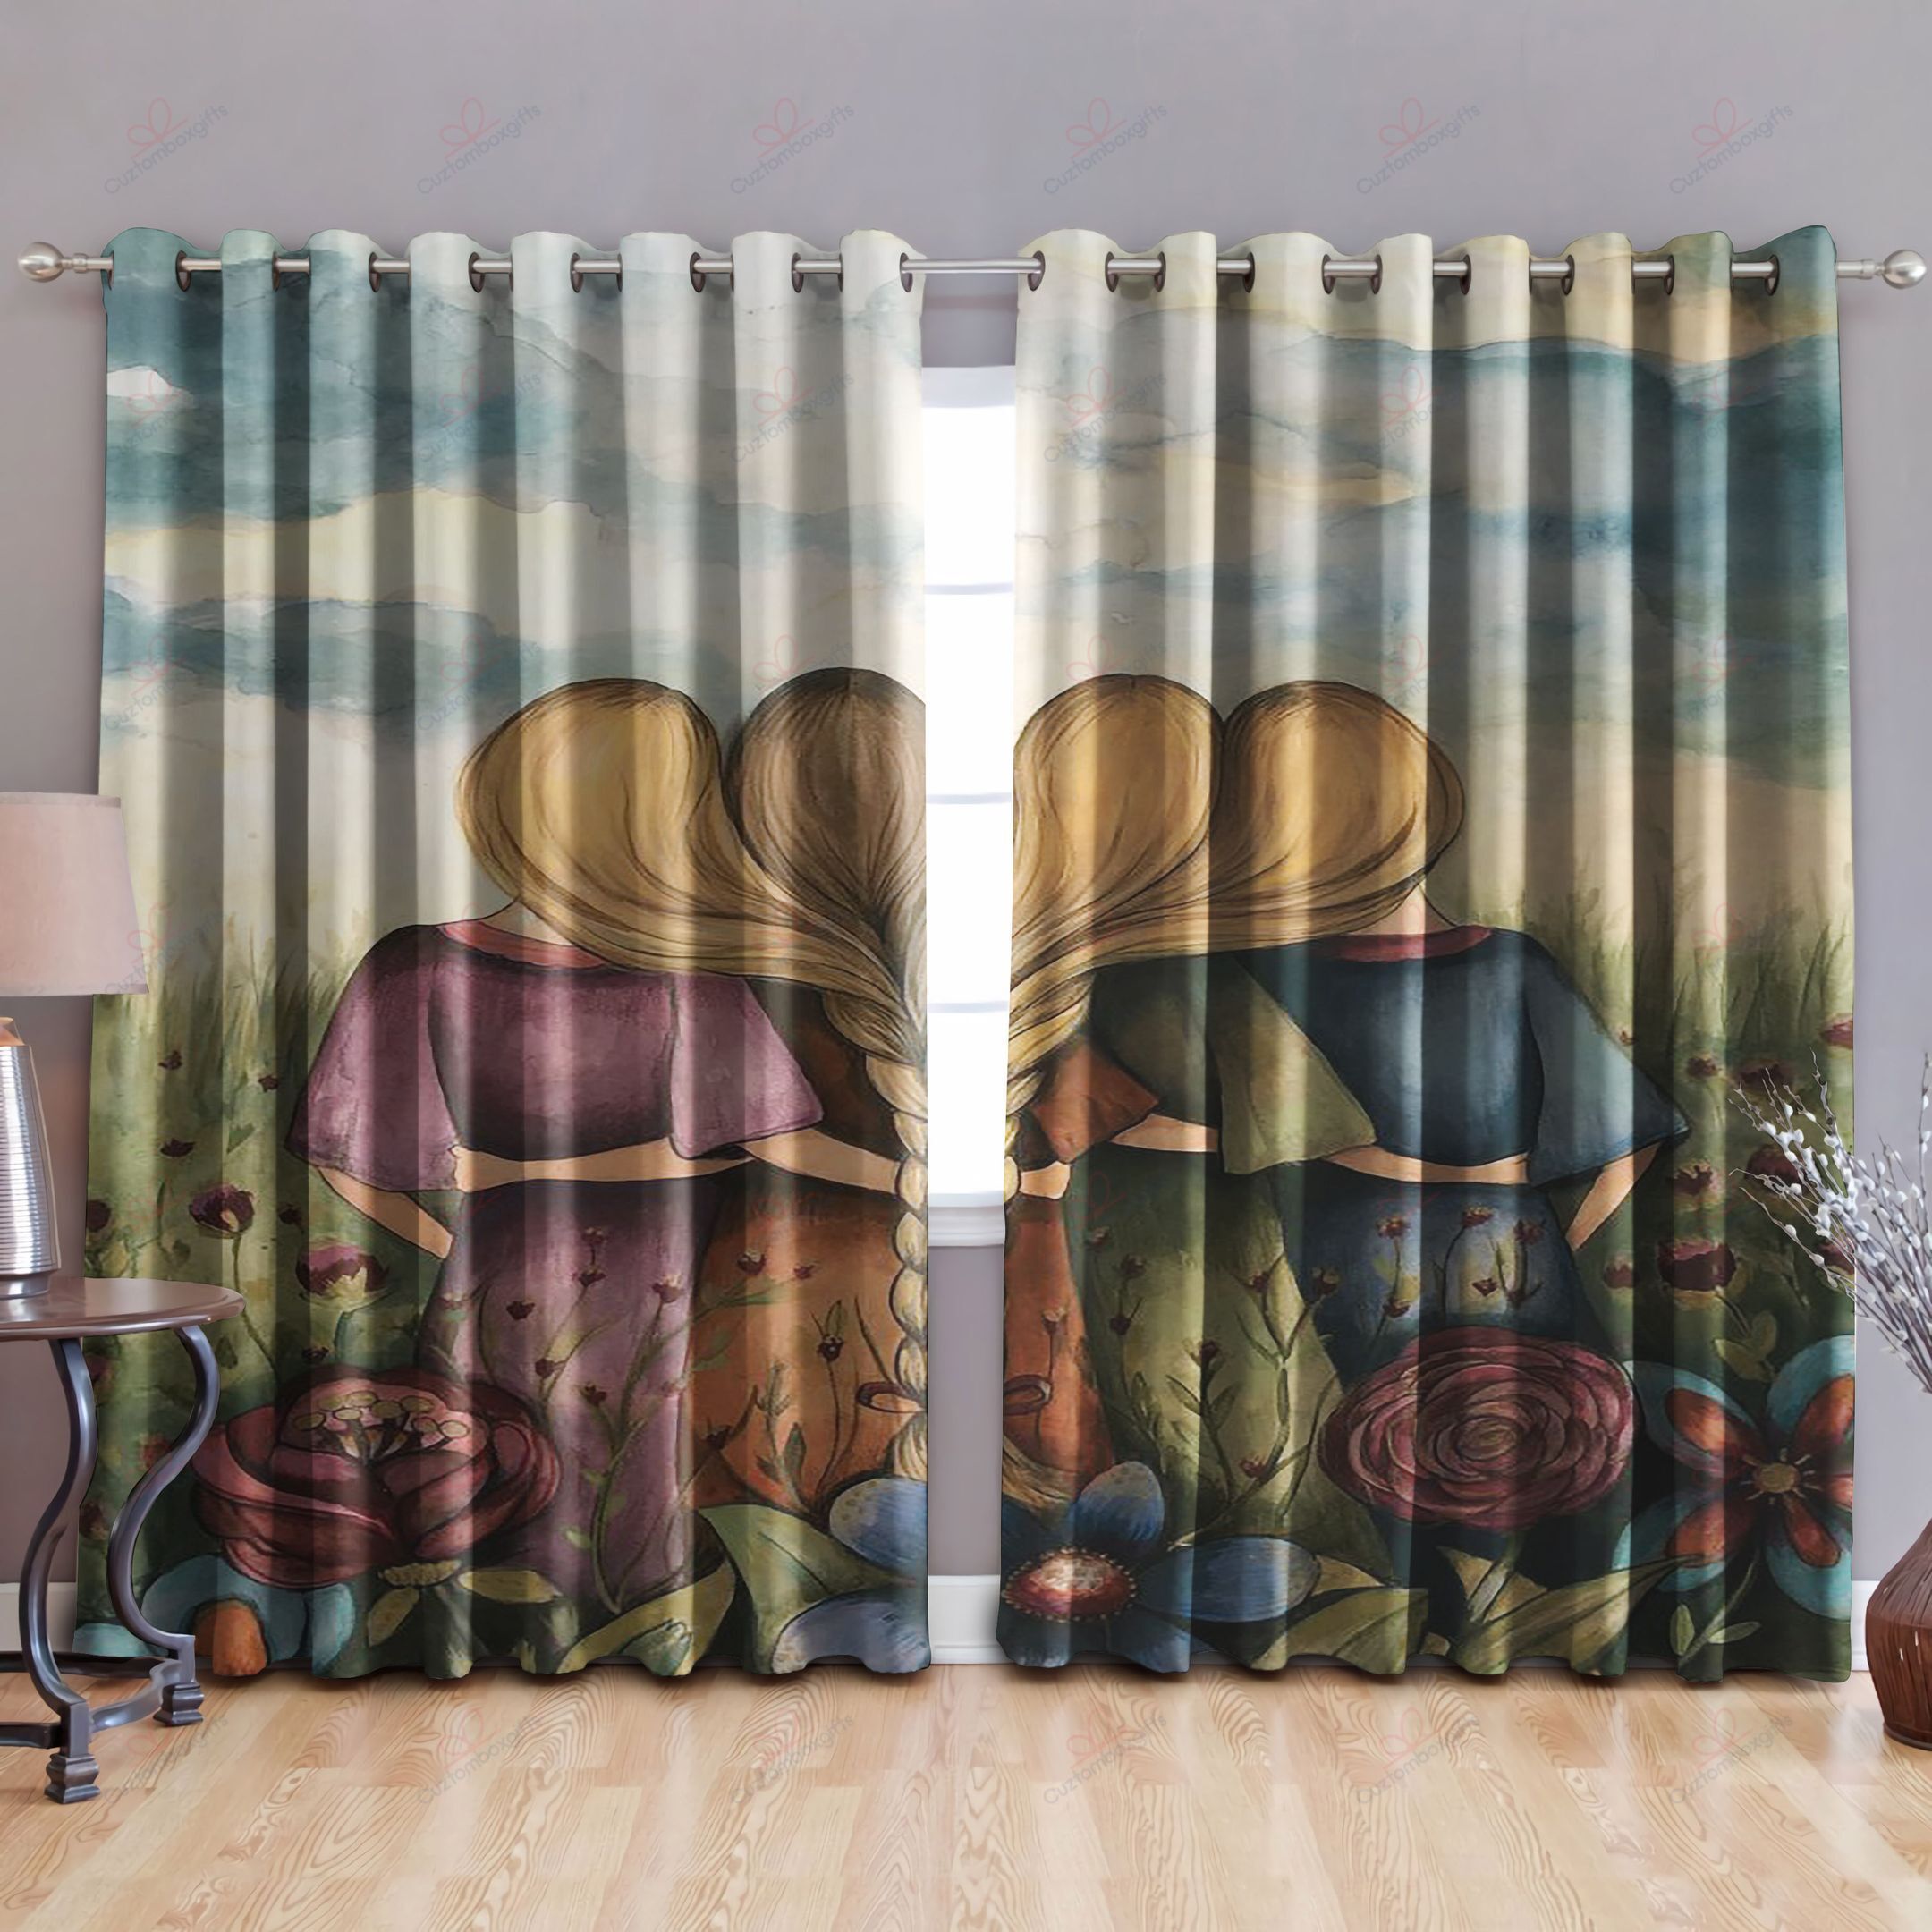 The Four Sisters Best Friends Printed Window Curtain Home Decor